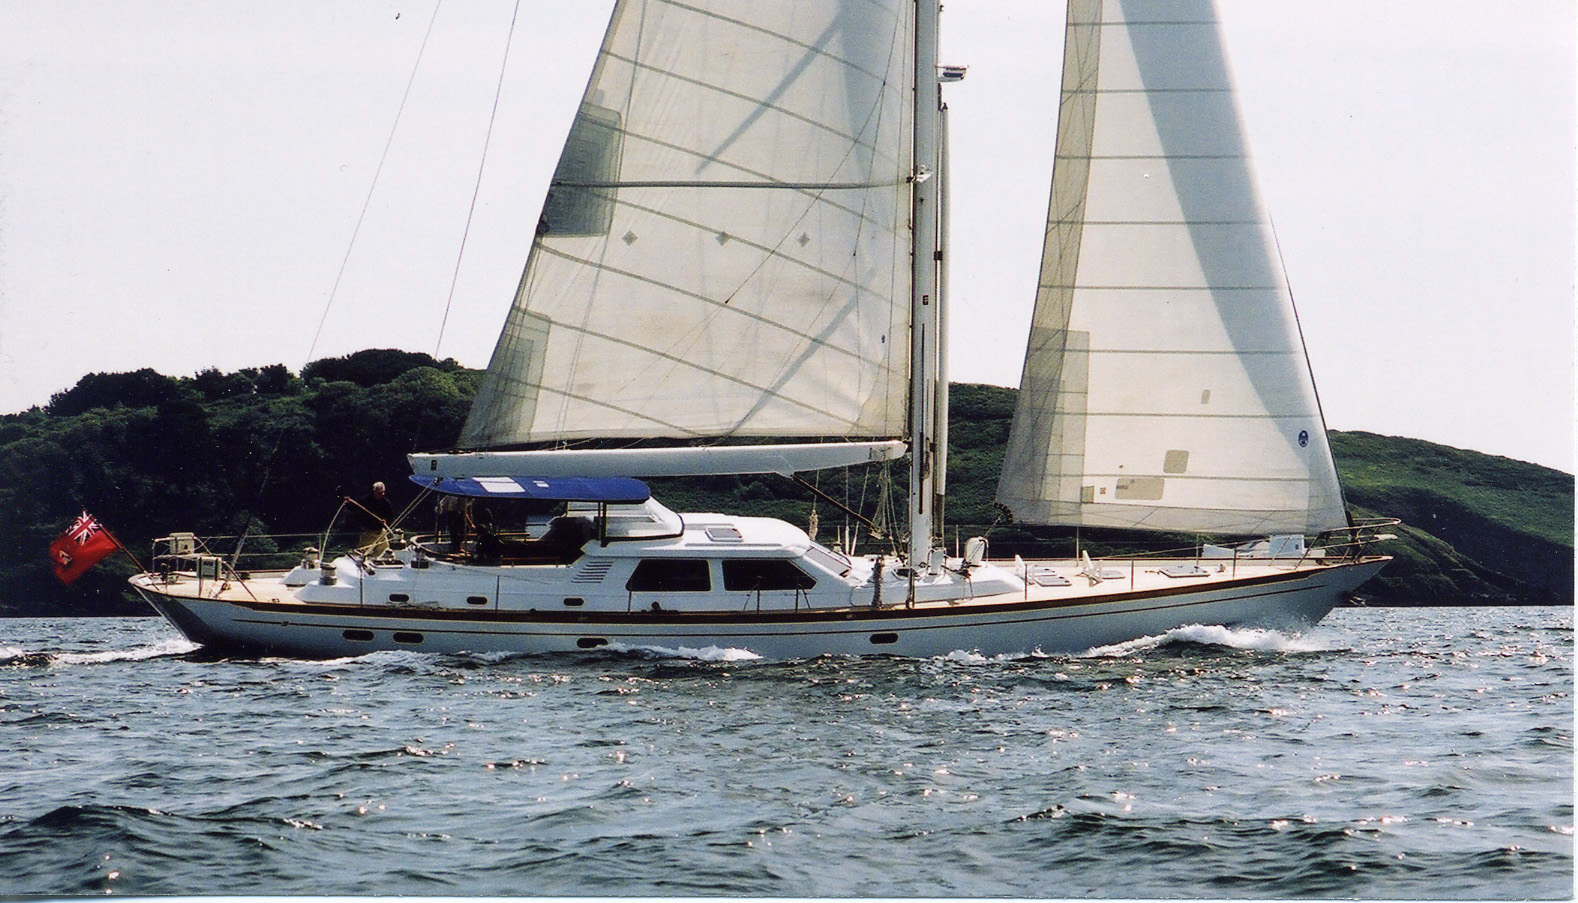 Ron Holland Design yacht "Golden Opus" sailing in Singapore waters